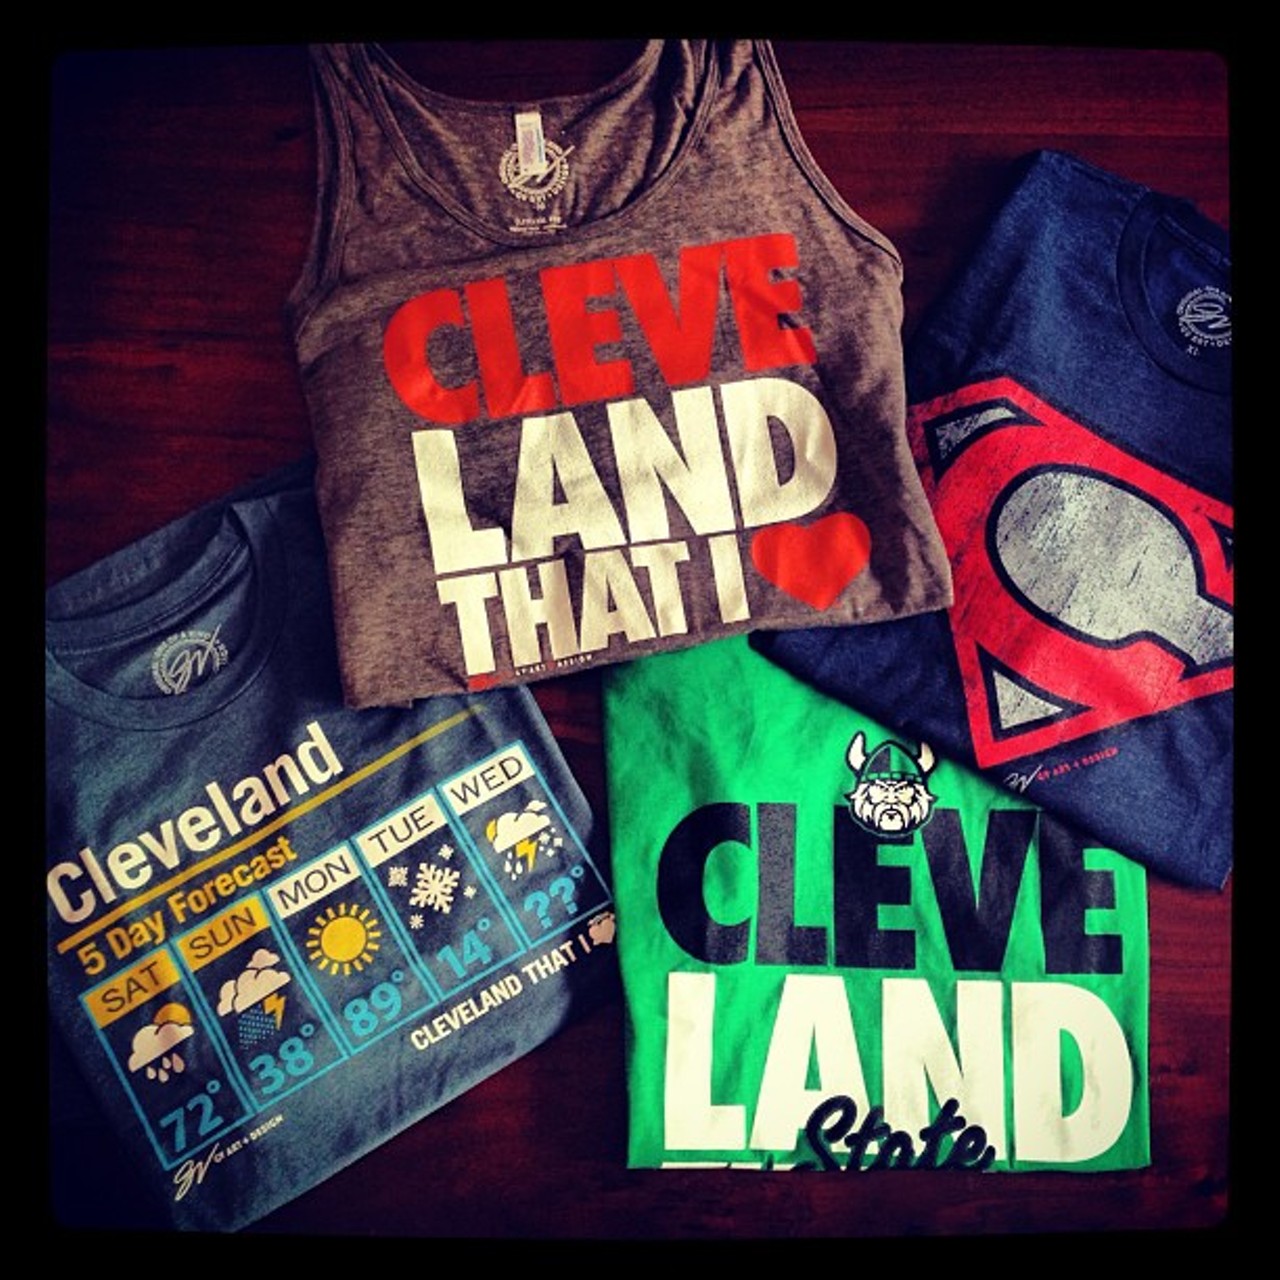 Since 2008, the gents of Lakewood's GV Art + Design have been hooking Clevelanders up with their extensive inventory of snazzy T's and tanks (plus a whole lot more). Where these guys earn points is in their dedication to spreading their hometown pride with their line of "Cleveland That I Love" apparel, featuring iconic images (think everything from Superman to the Muni Lot). We've already stocked up on a handful of their original summer tanks and suggest you do the same. Take a peek at the goods at gvartwork.myshopify.com or browse the racks at 17411 Detroit Ave., Lakewood.